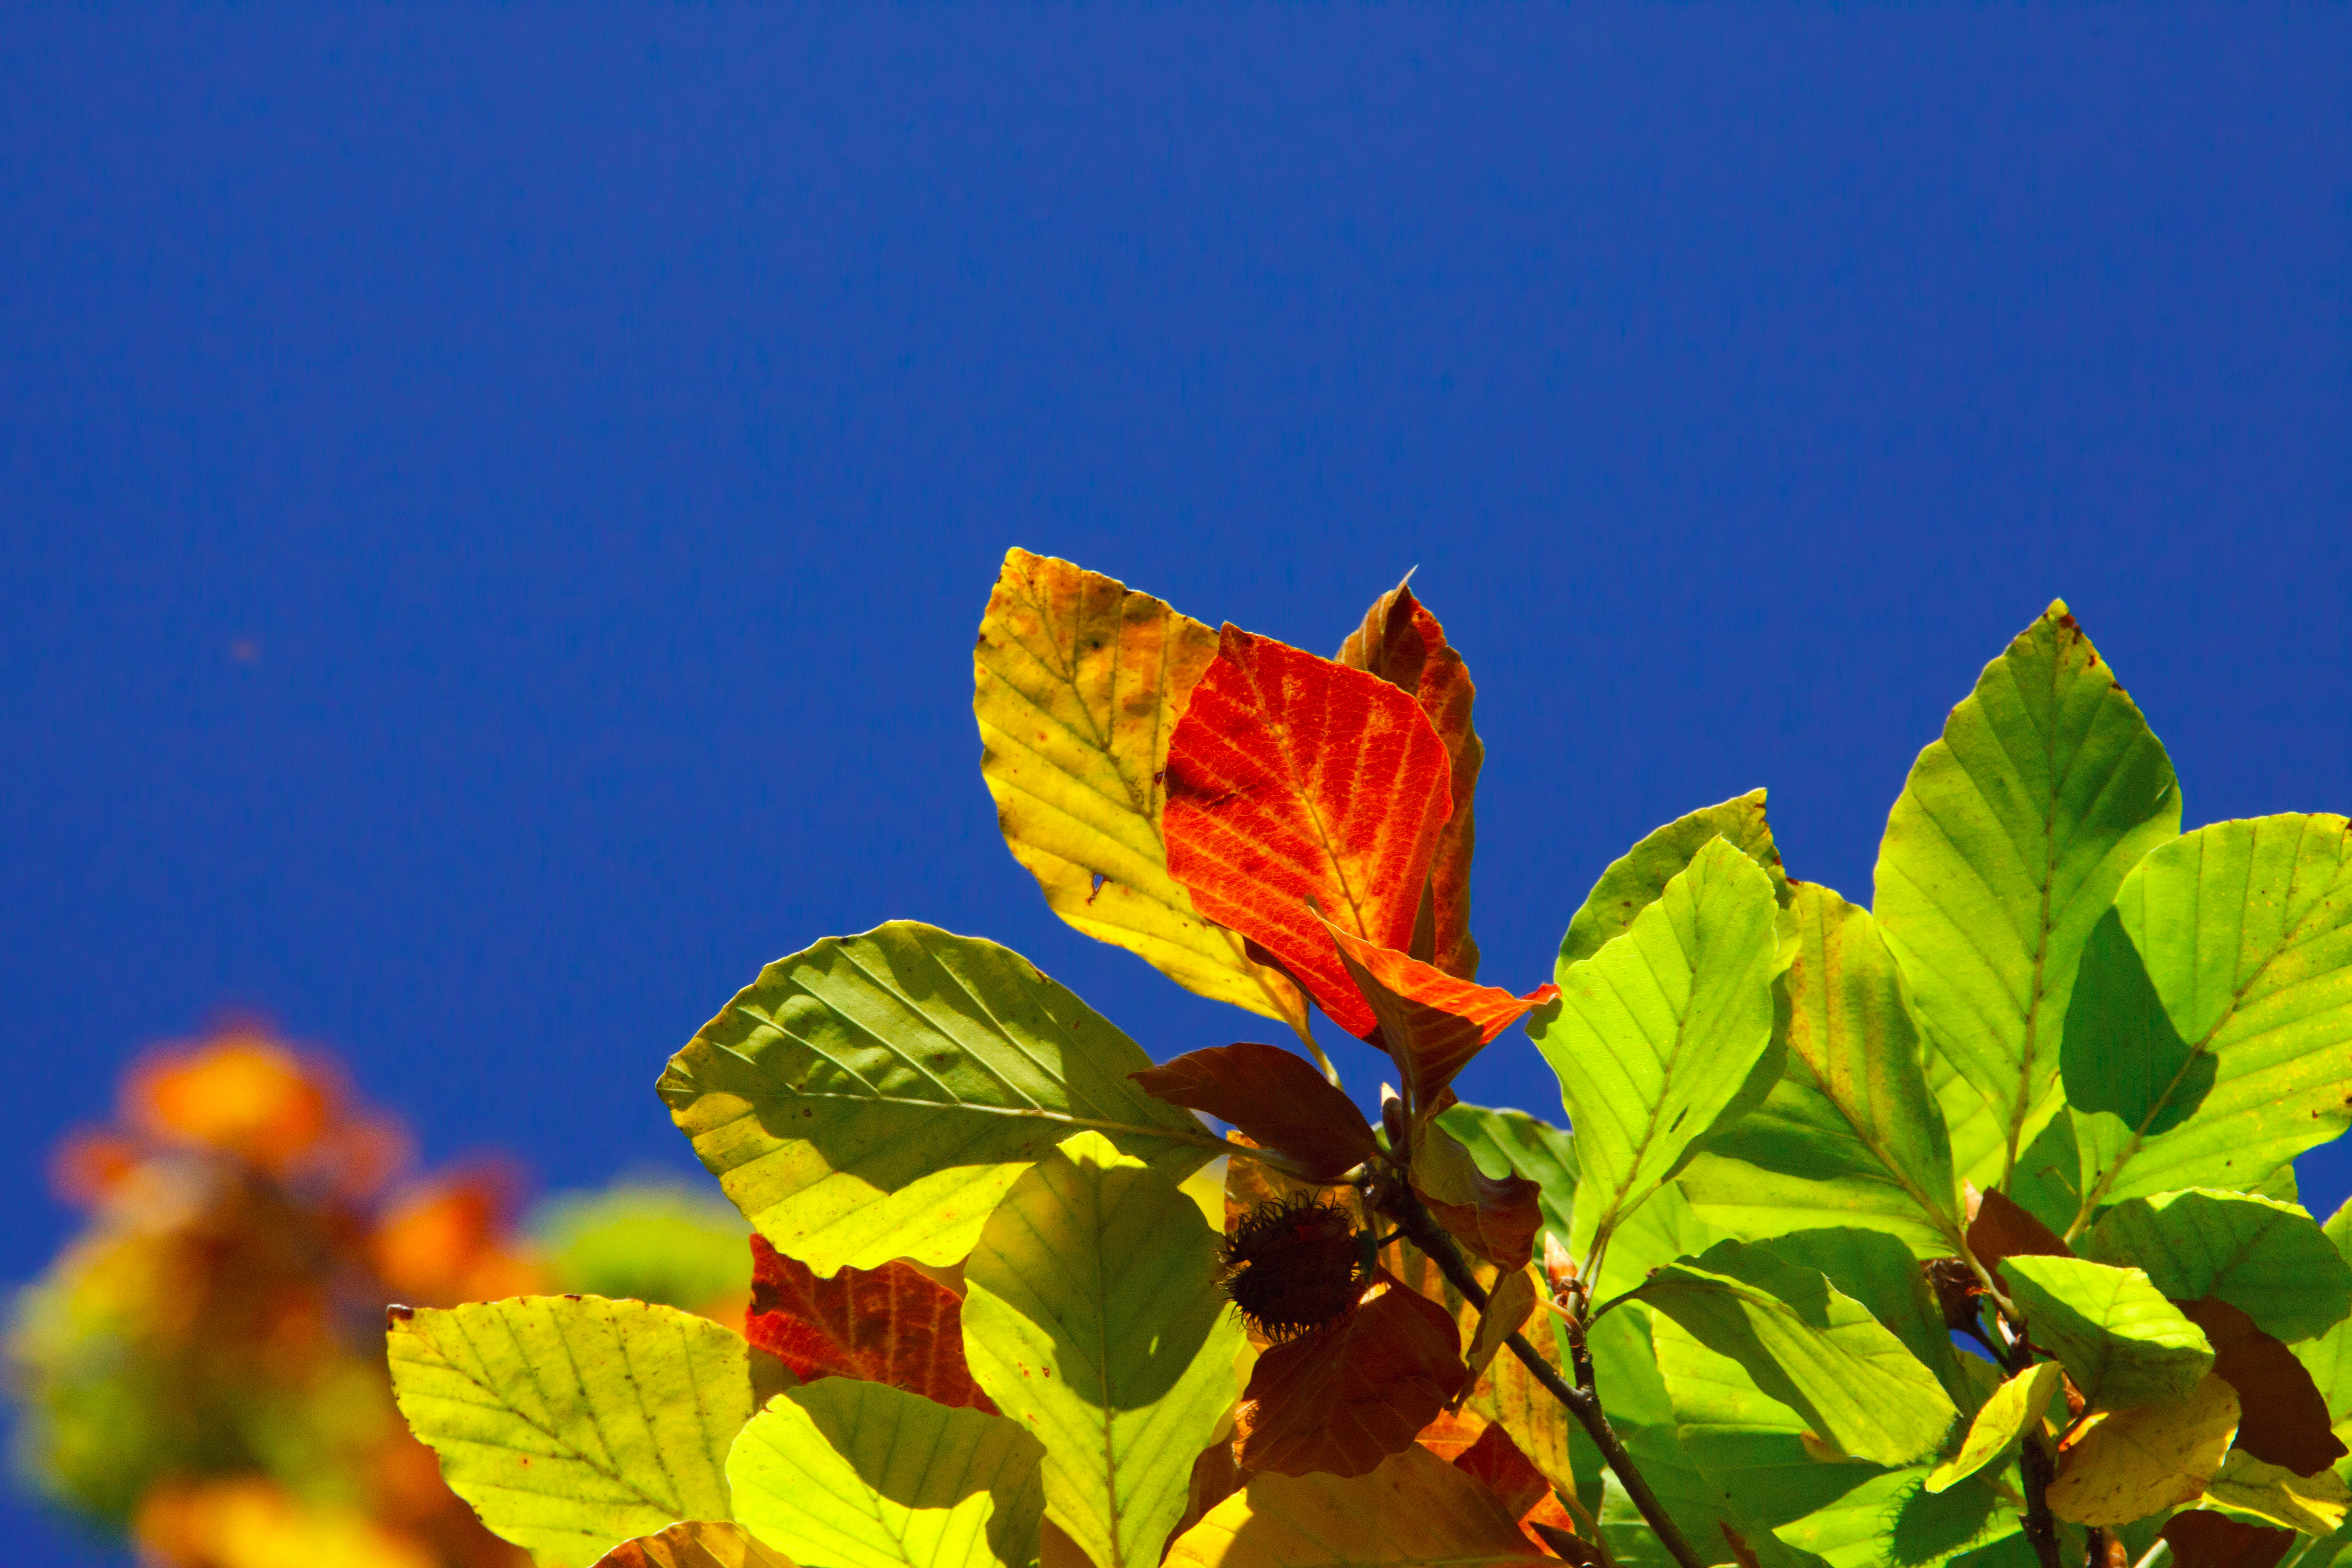 Autumn Leaves in Blue Sky Background